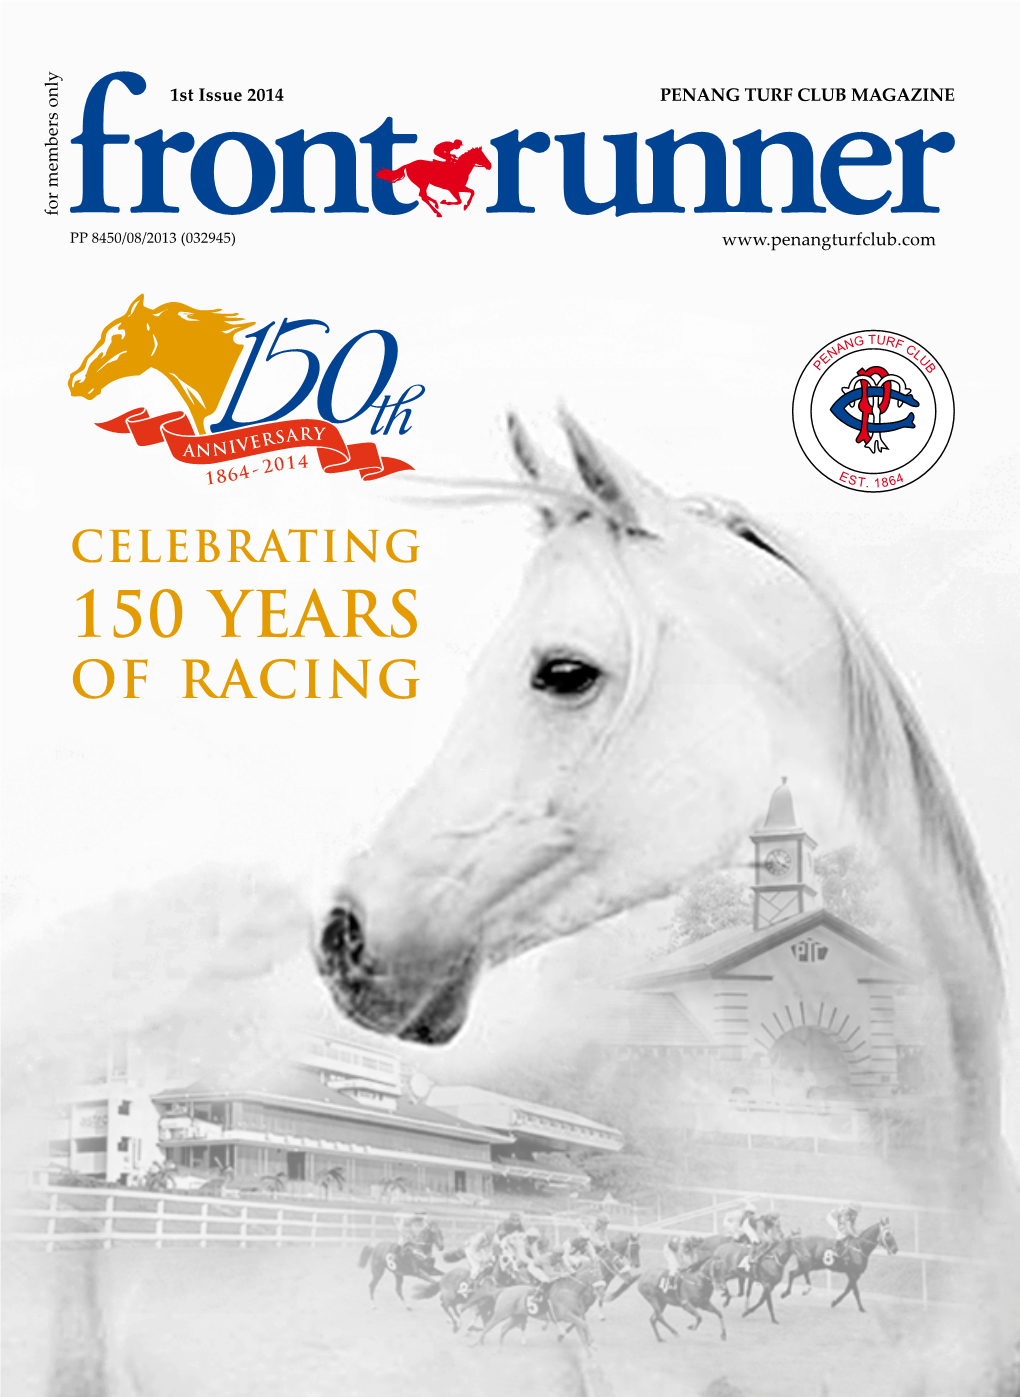 1St Issue 2014 Penang Turf Club Magazine for Members Only PP 8450/08/2013 (032945)